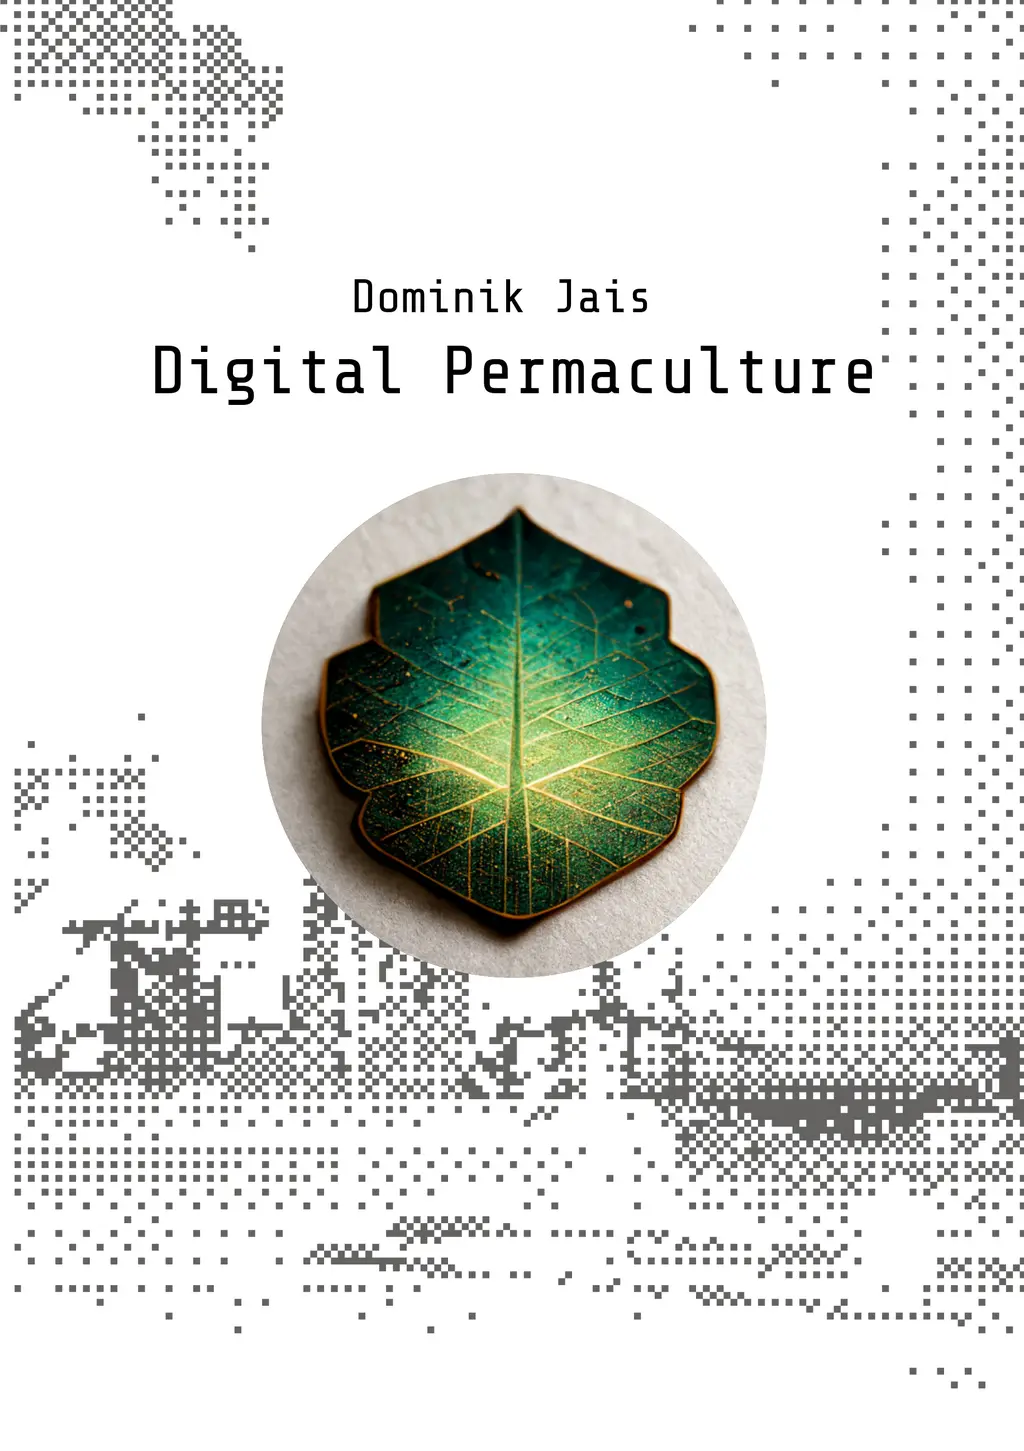 Digital Permaculture - book cover